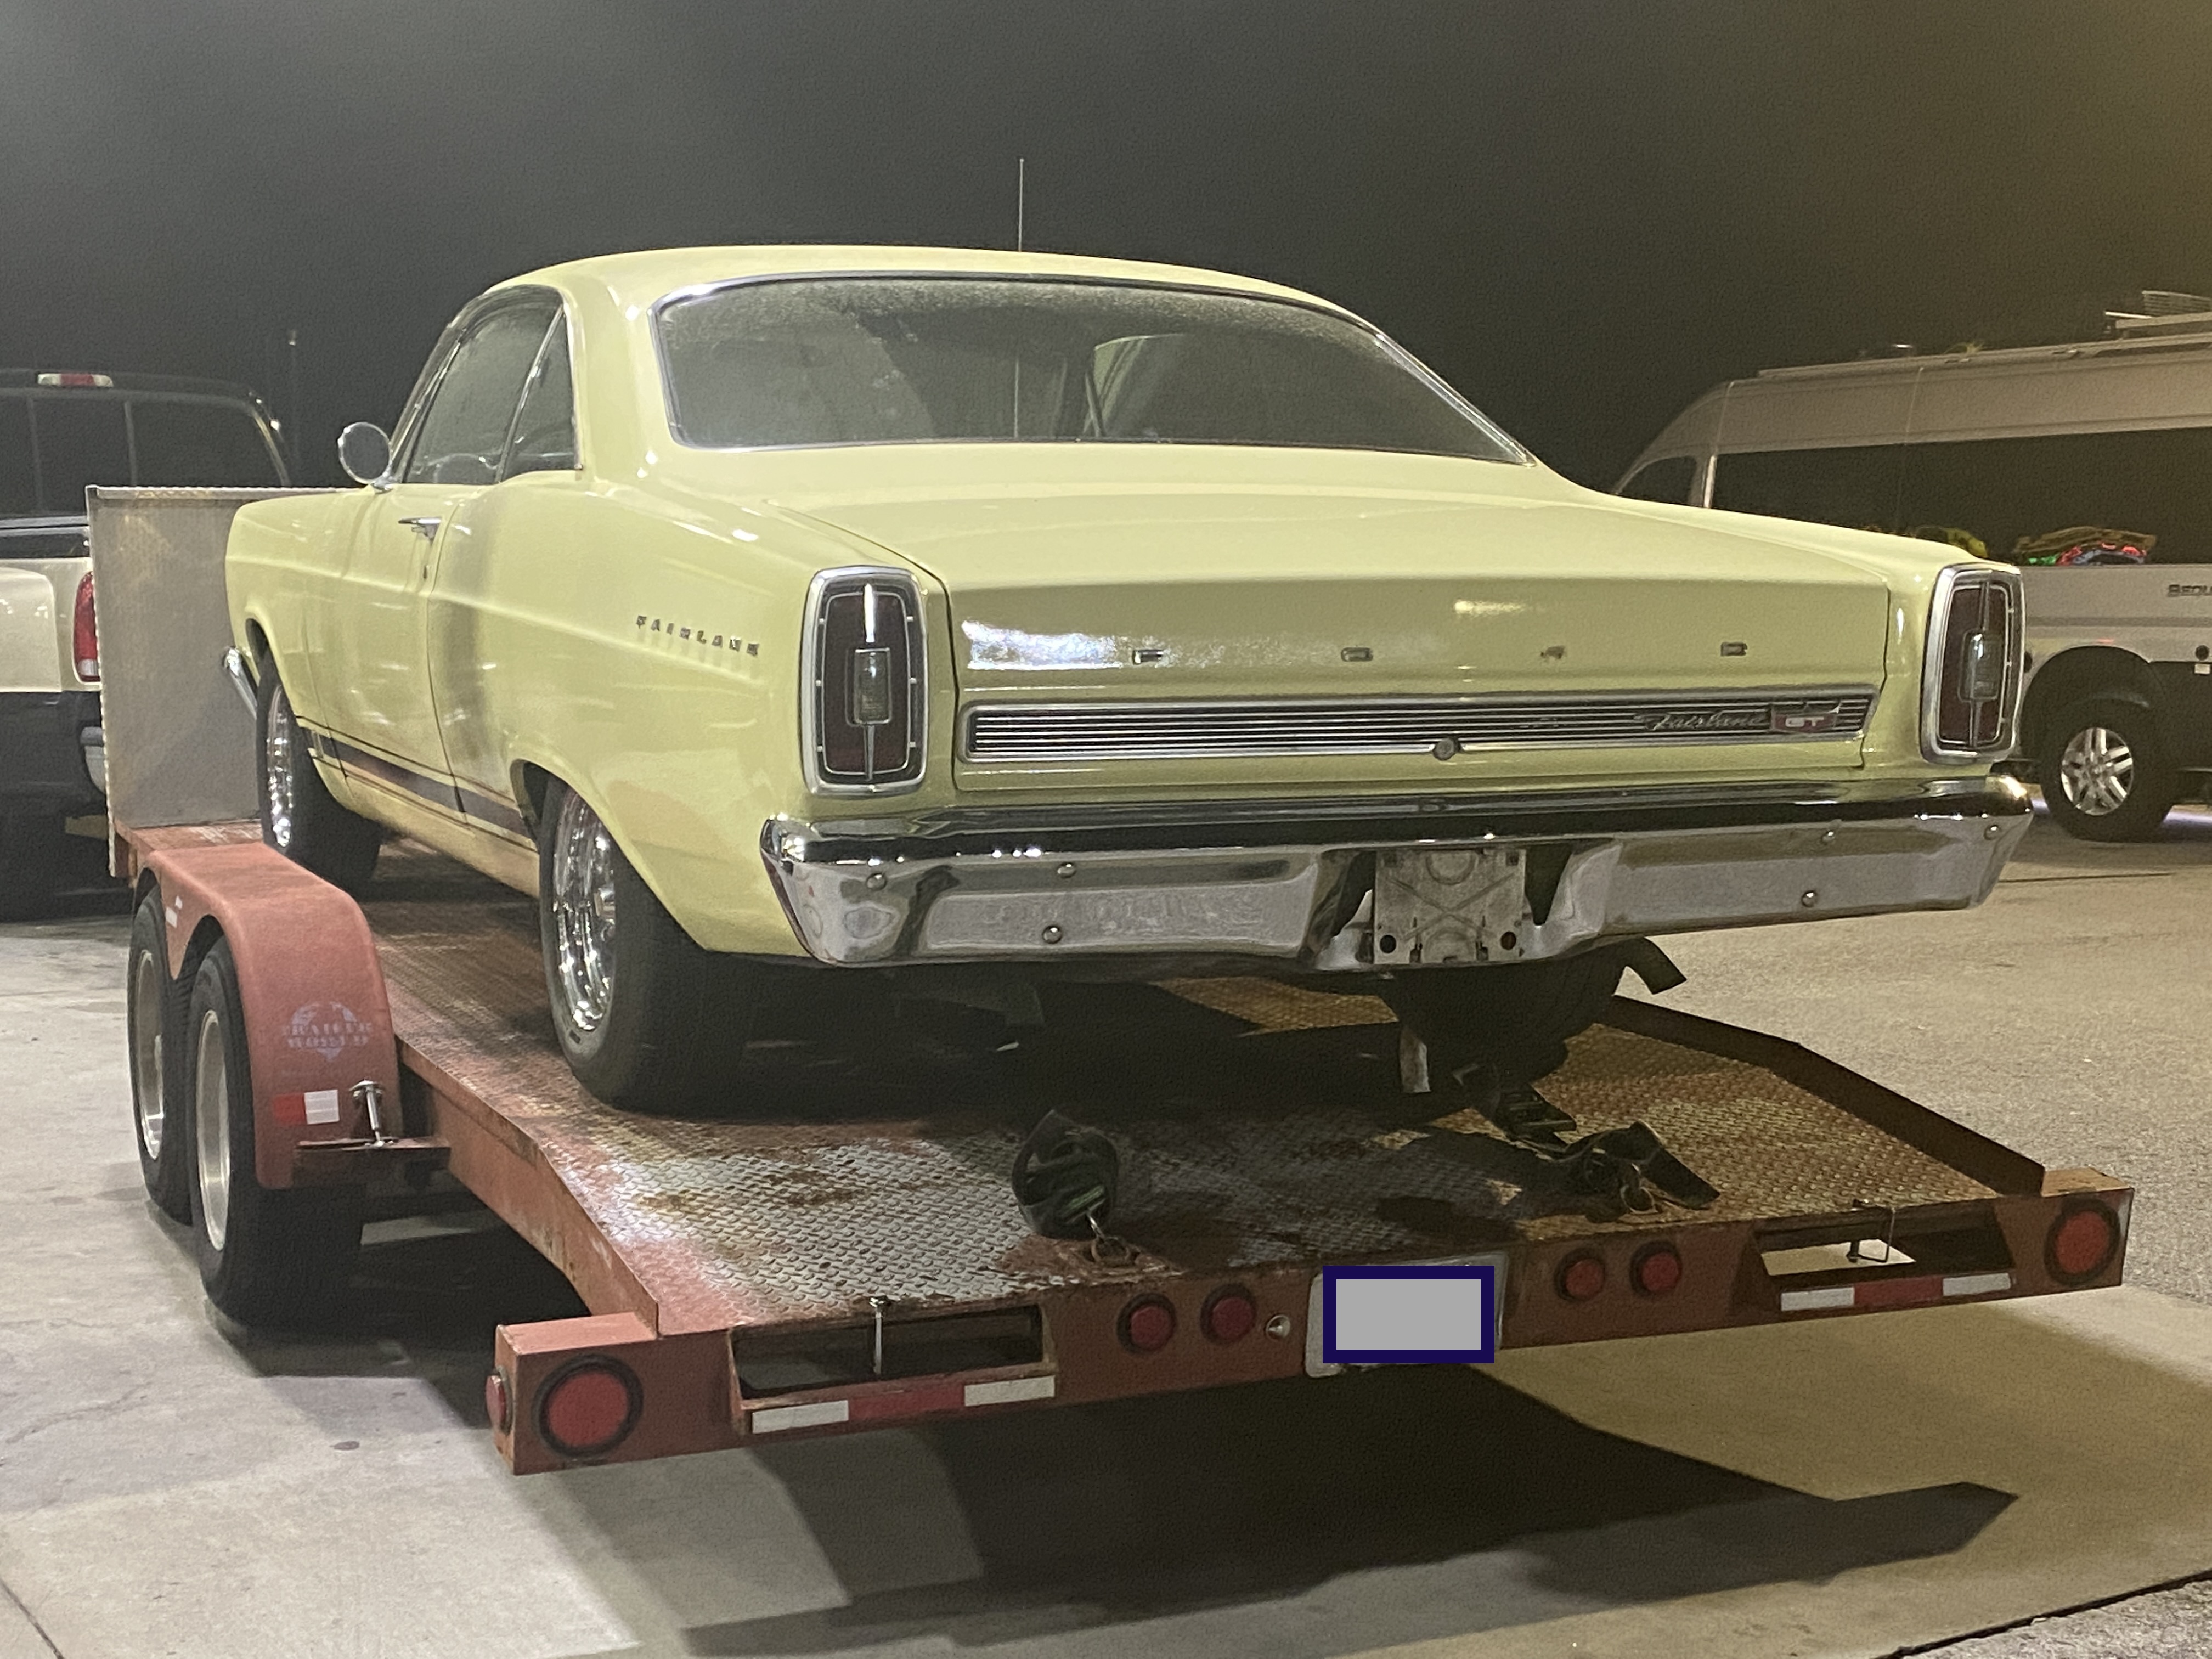 Unhinged: The eBay Fairlane Trip – What All Was Involved In Getting A 1966 Ford Home!